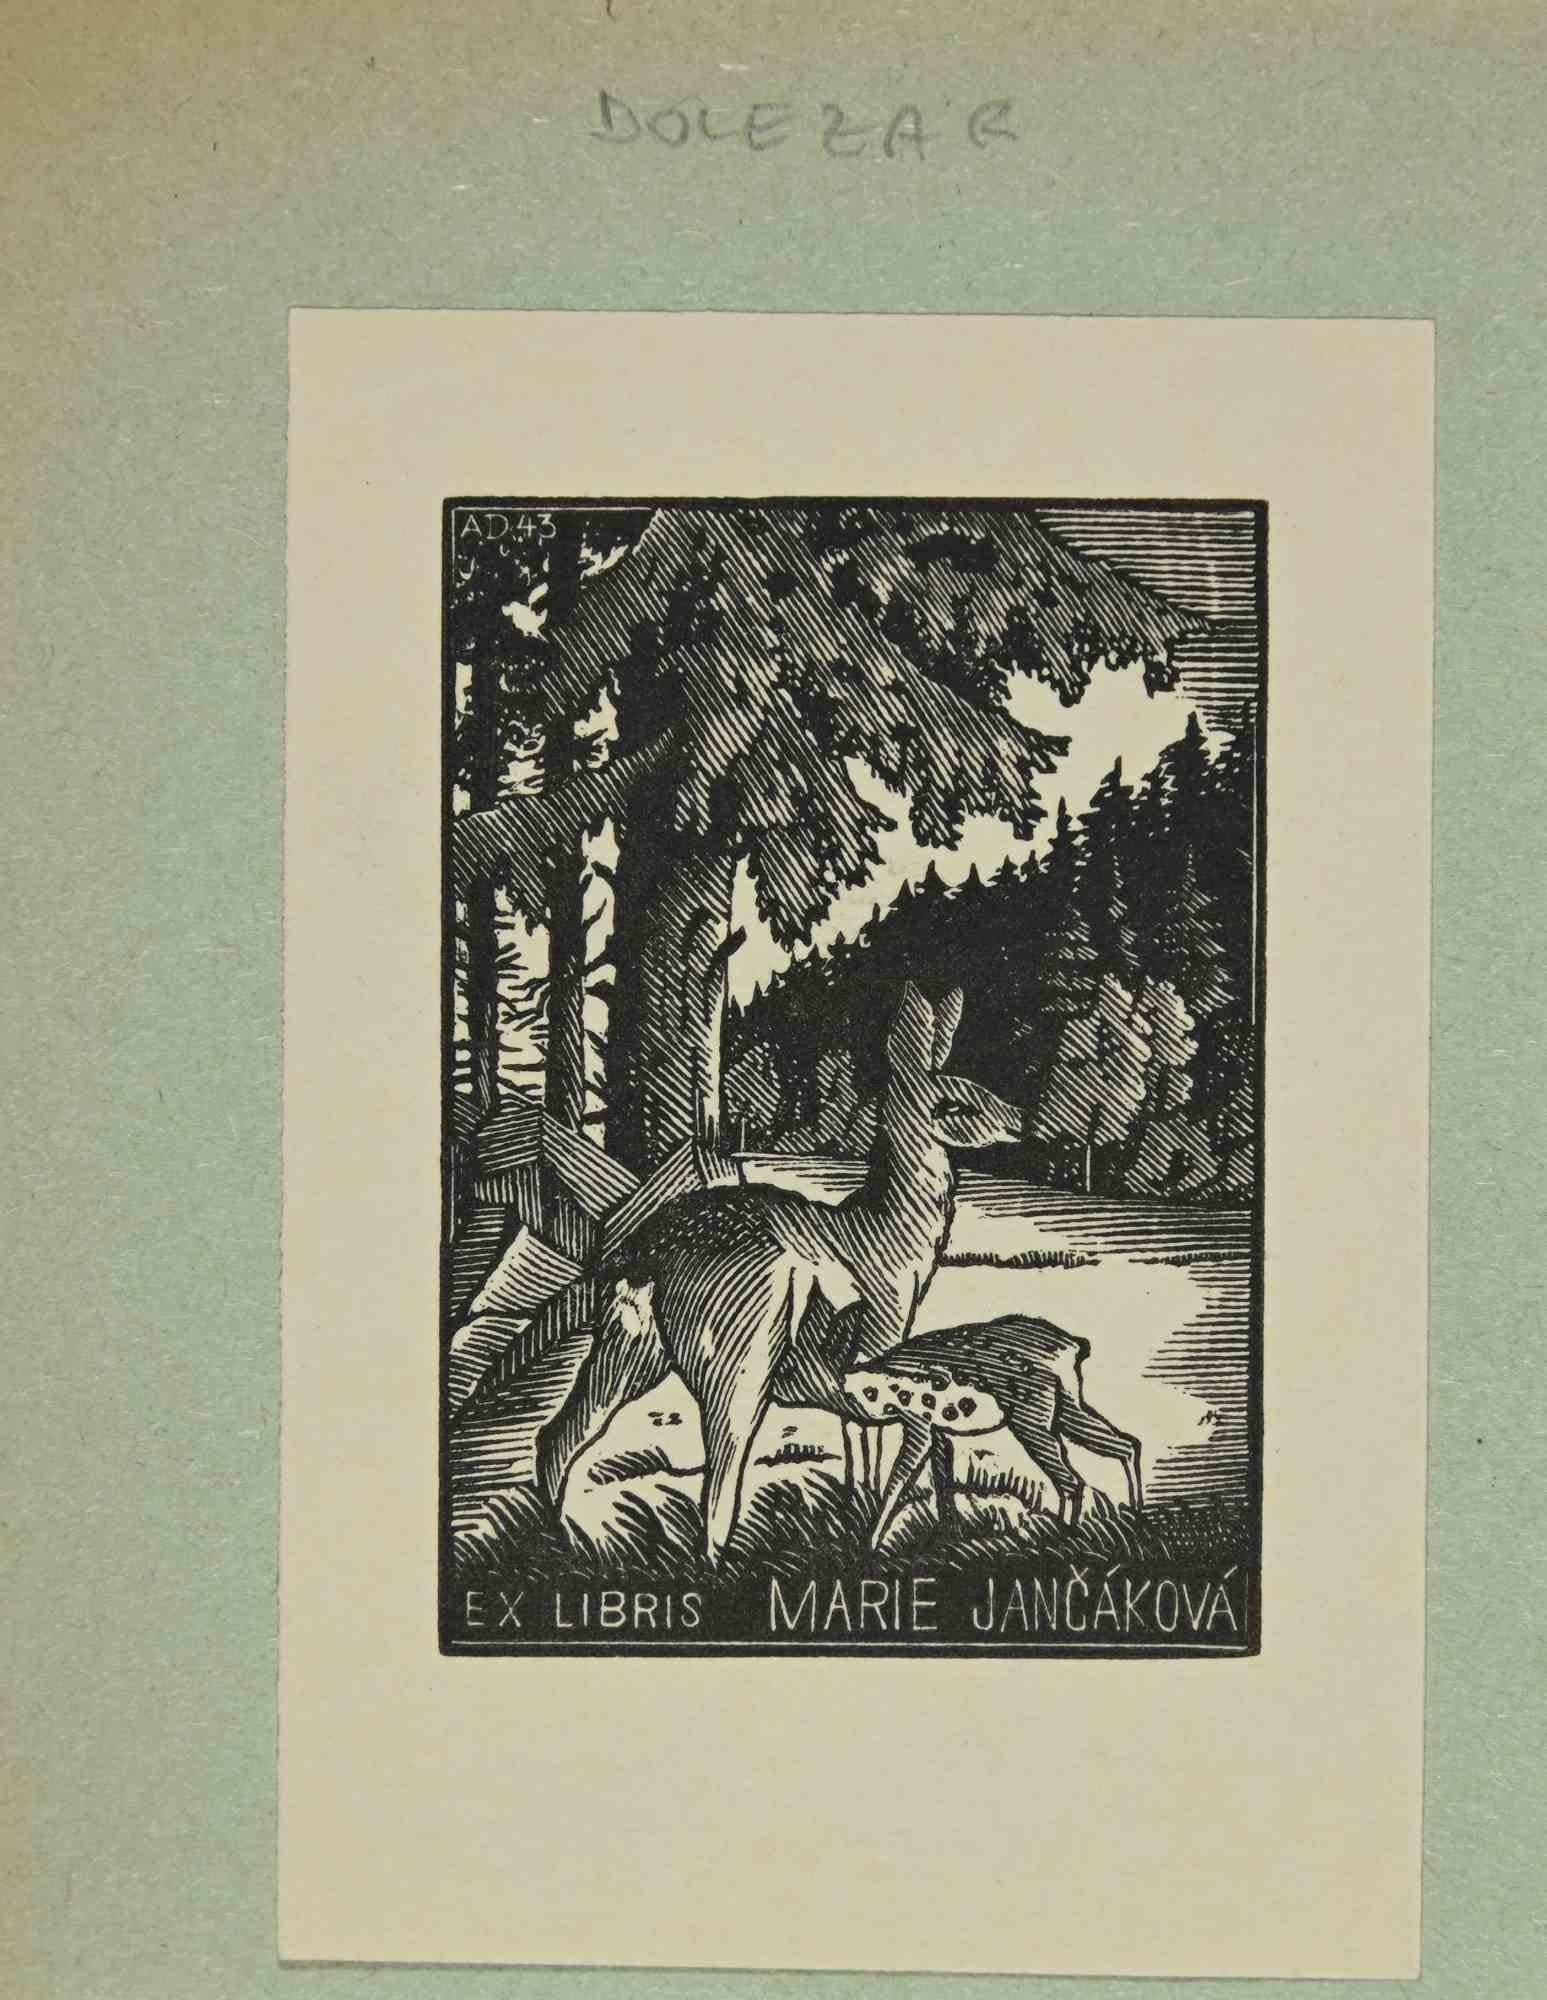 Ex libris - Marie Jancáková is an Artwork realized in Mid 20th Century, by the Artist A. Dolezar. 

Woodcut print on ivory paper. Hand signed on back. The work is glued on green cardboard.

Total dimensions: 12x10 cm.

Good conditions.

The artist